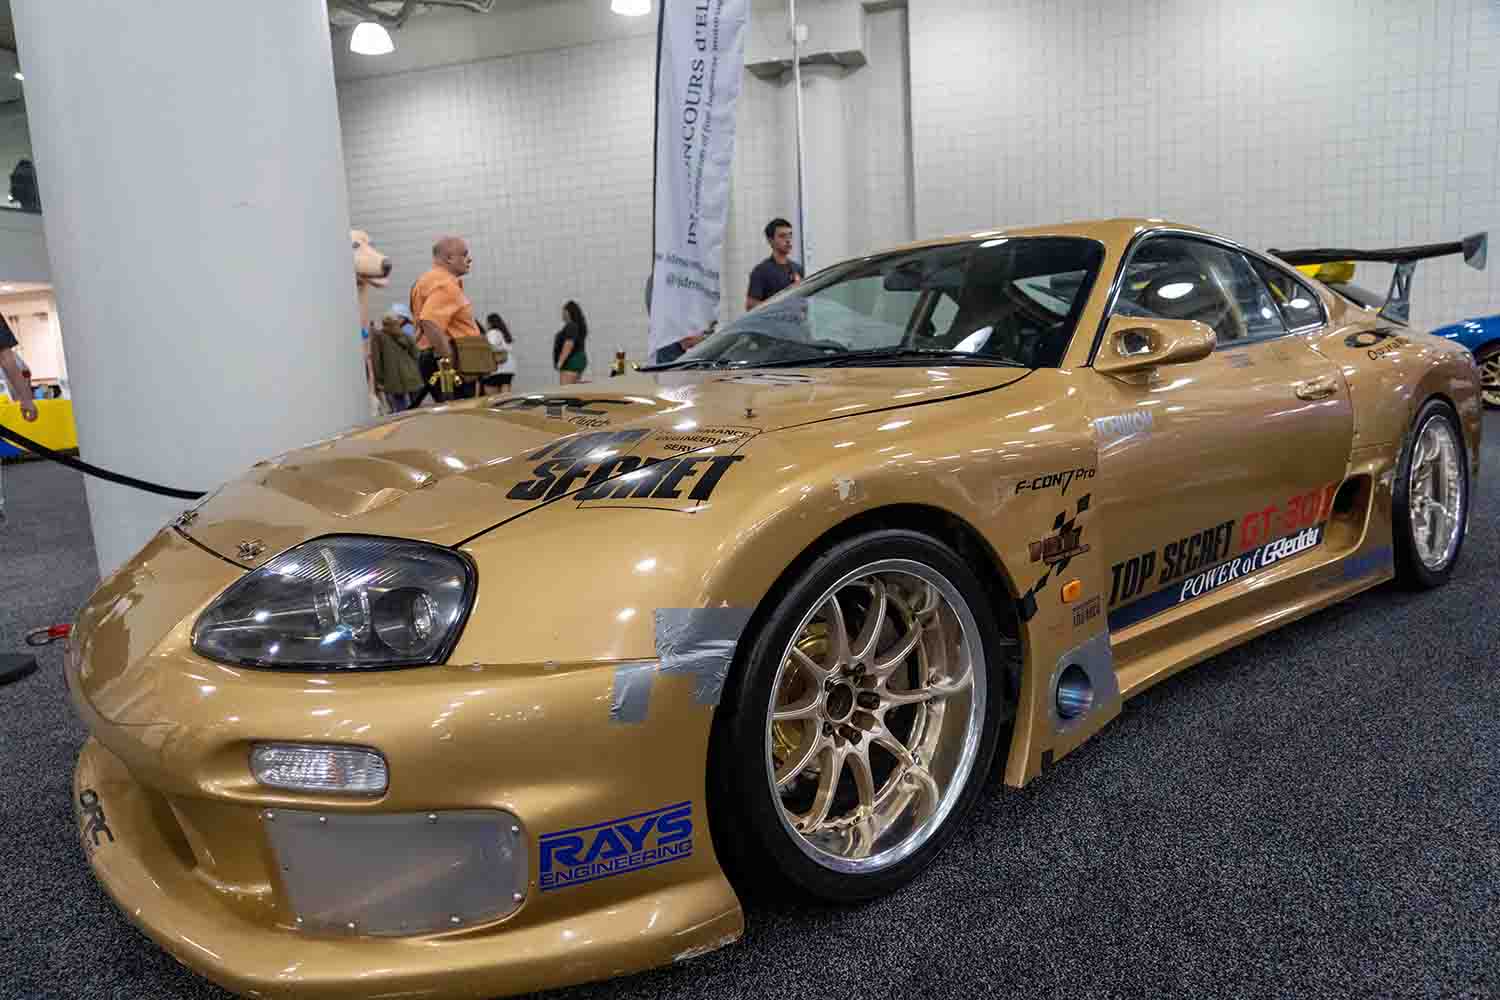 four-cylinder Toyota Supra on display at New York Auto Show